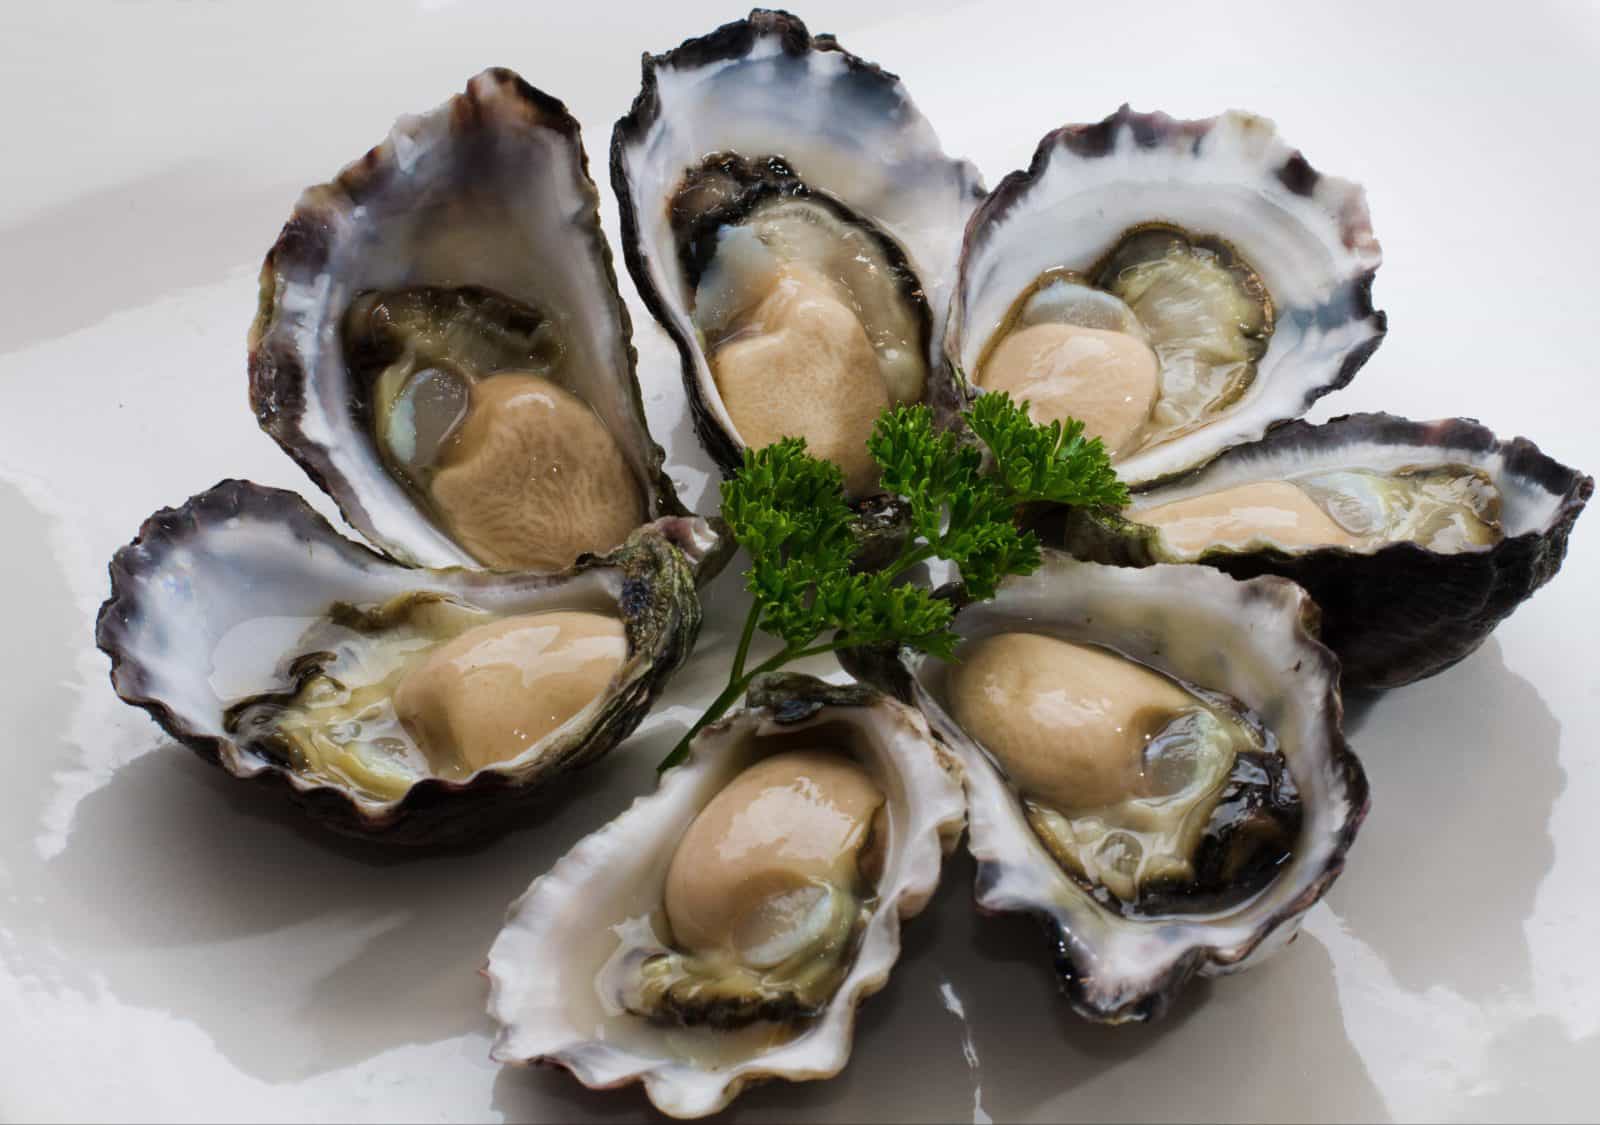 Luscious Tathra Oysters grown in the Pristine waters of Nelsons Lake in Mimosa Rocks National Park,